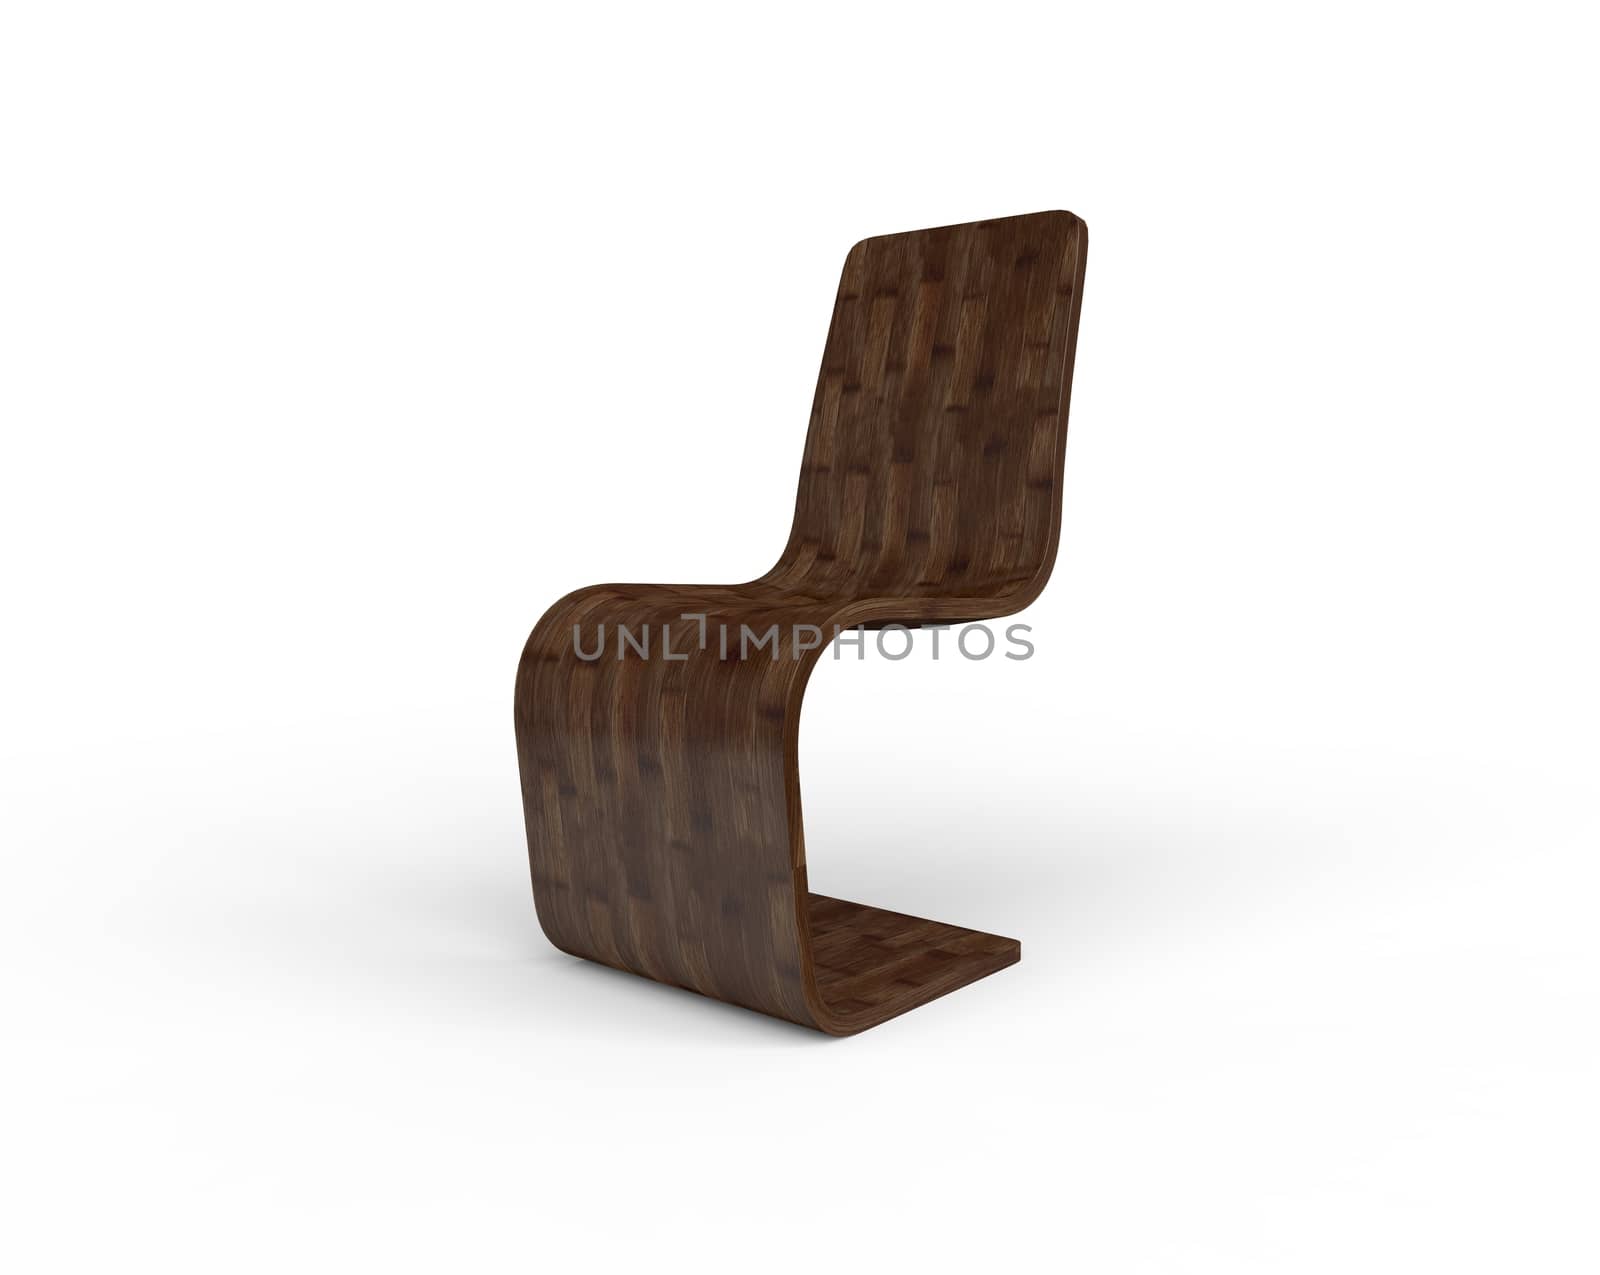 Modern wooden chair isolated on white background.